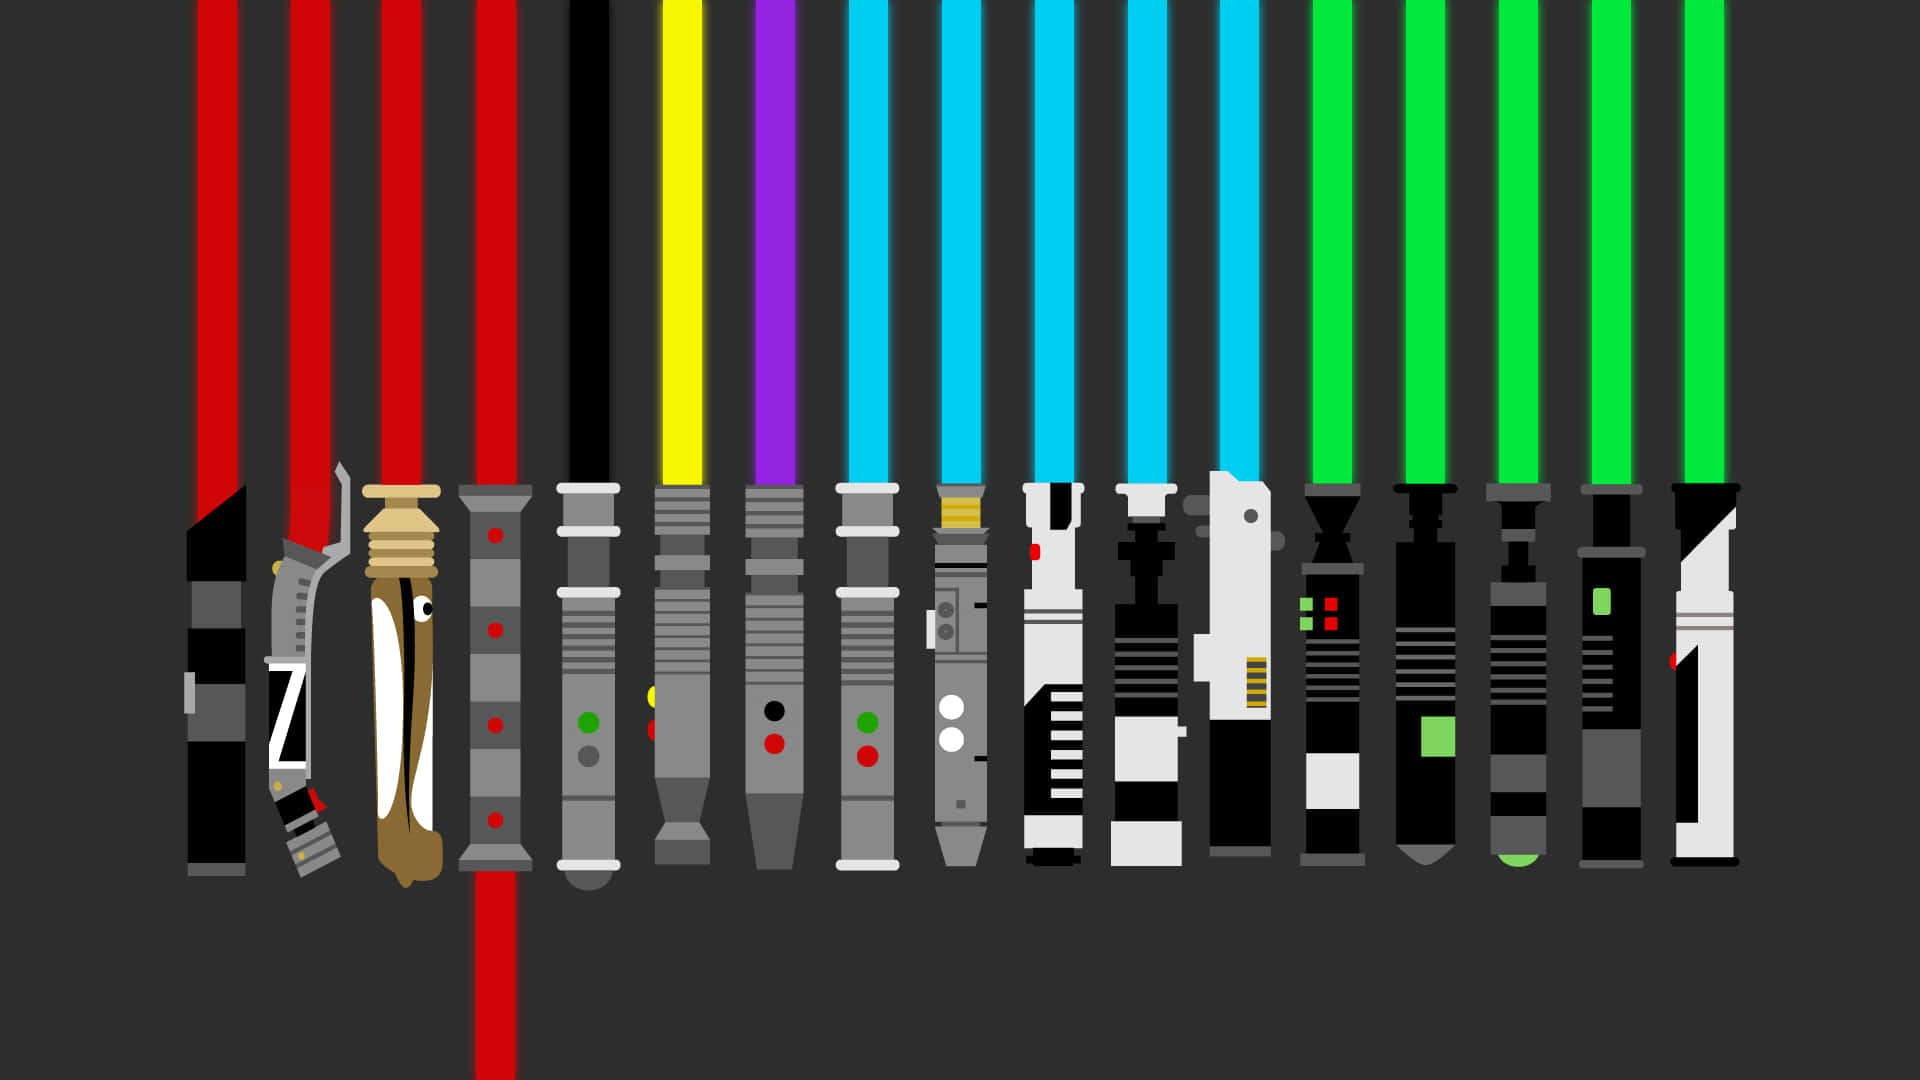 I did some lightsaber backgrounds and I thought I should share them  I  did a lego one cause I thought it was fun  rStarWars